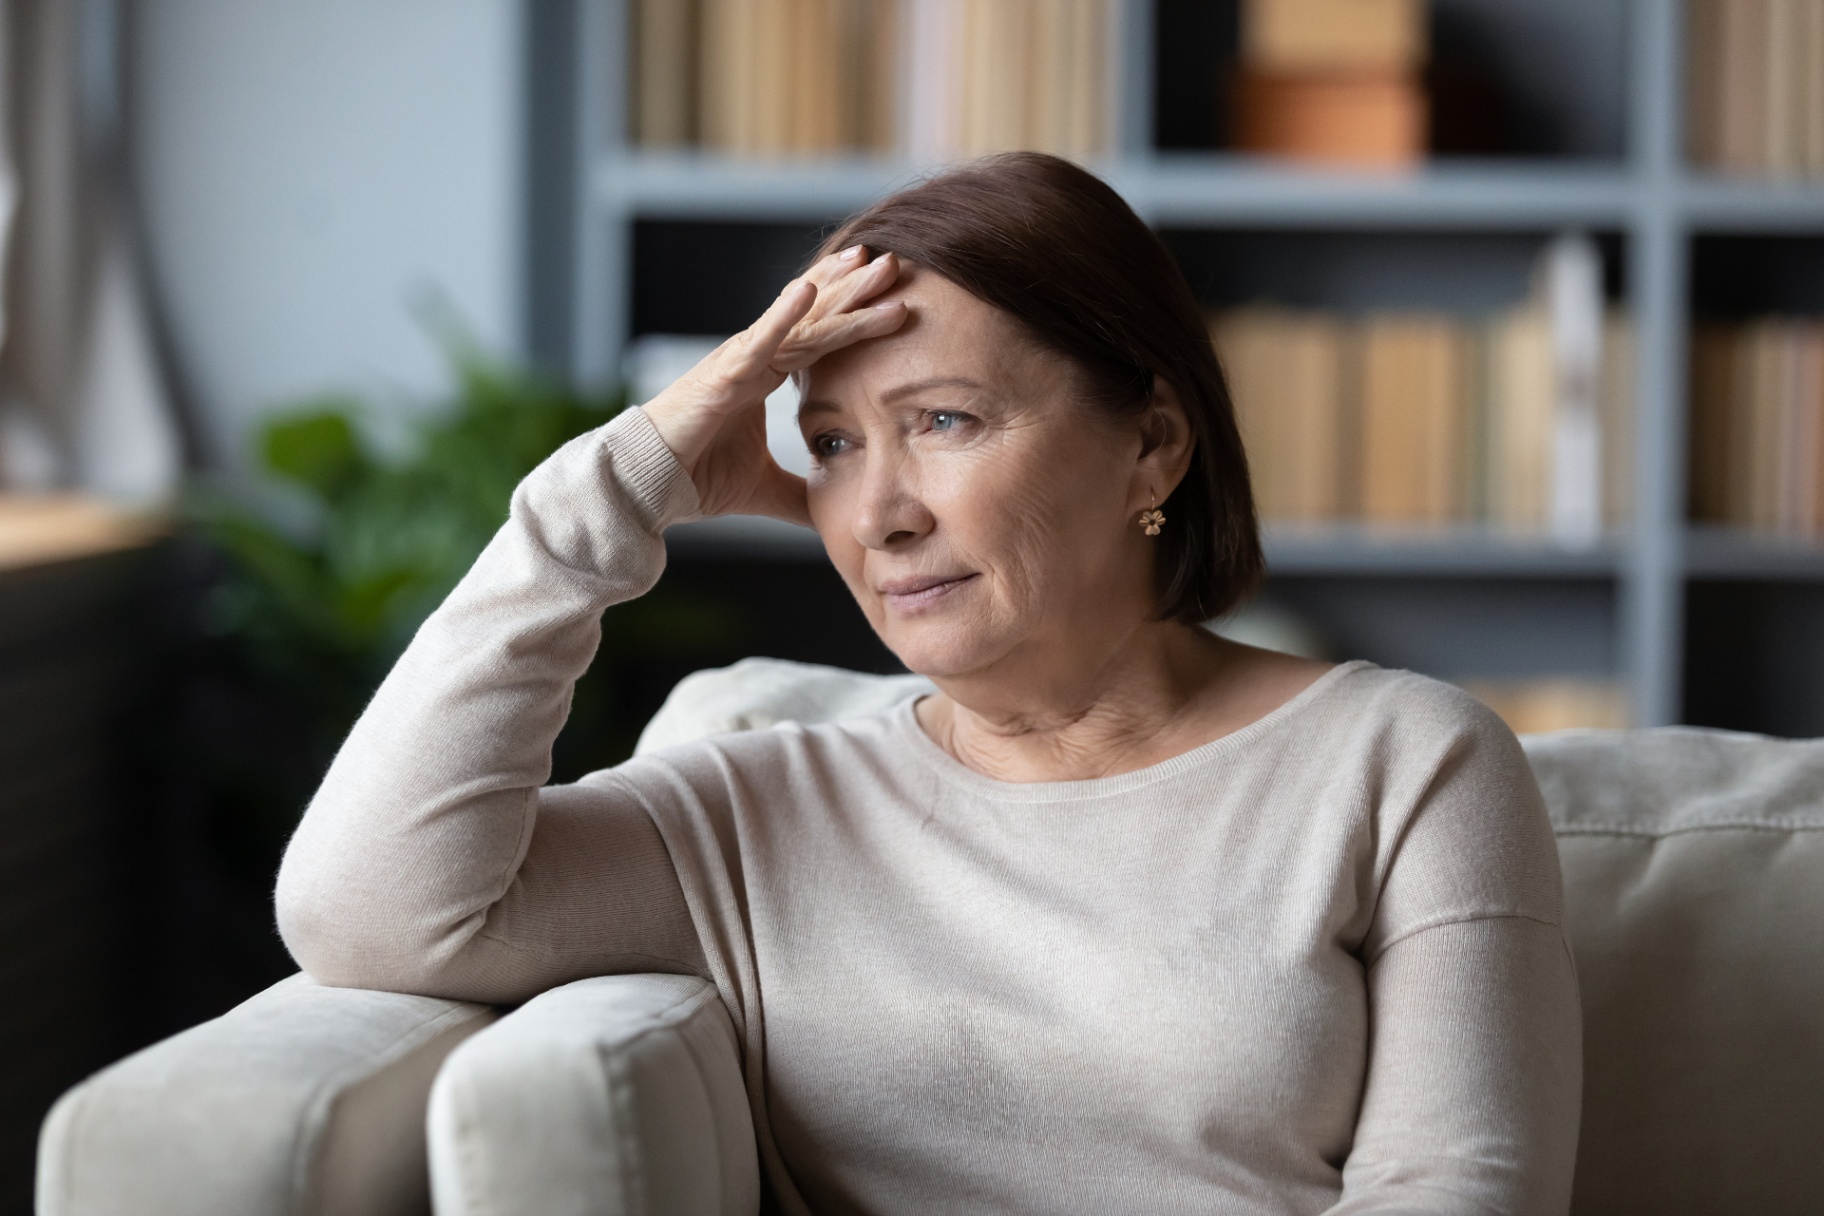 A woman sits with a bleak expression with her hand on her forehead. Learn how an addiction therapist in Palm Beach, FL can offer support in addressing different types of addiction in Palm Beach, FL. Searching “addiction therapist Pal Beach” can help you today!